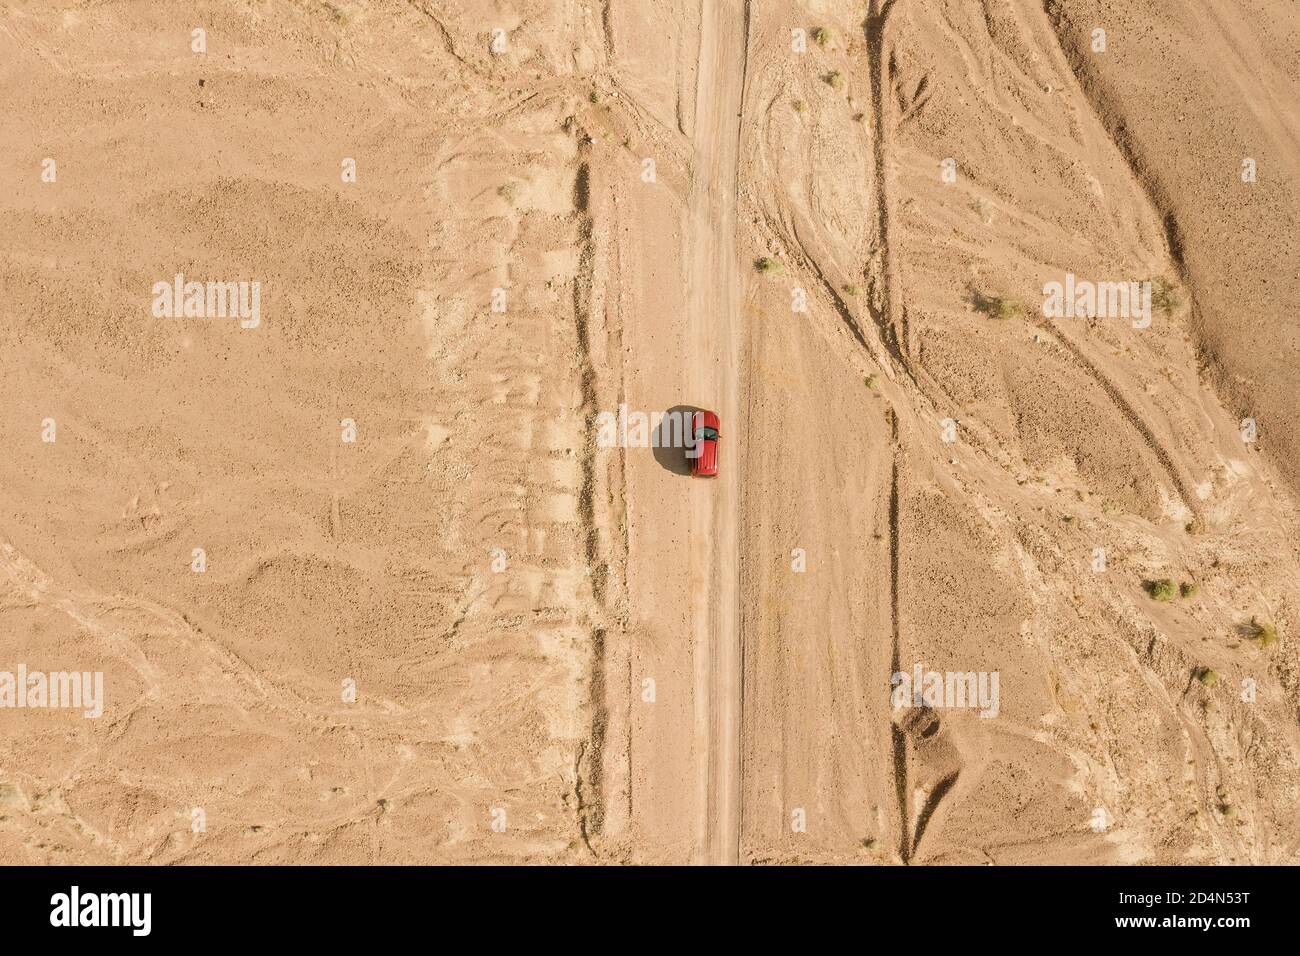 Red SUV on a desert path, high altitude aerial image. Stock Photo